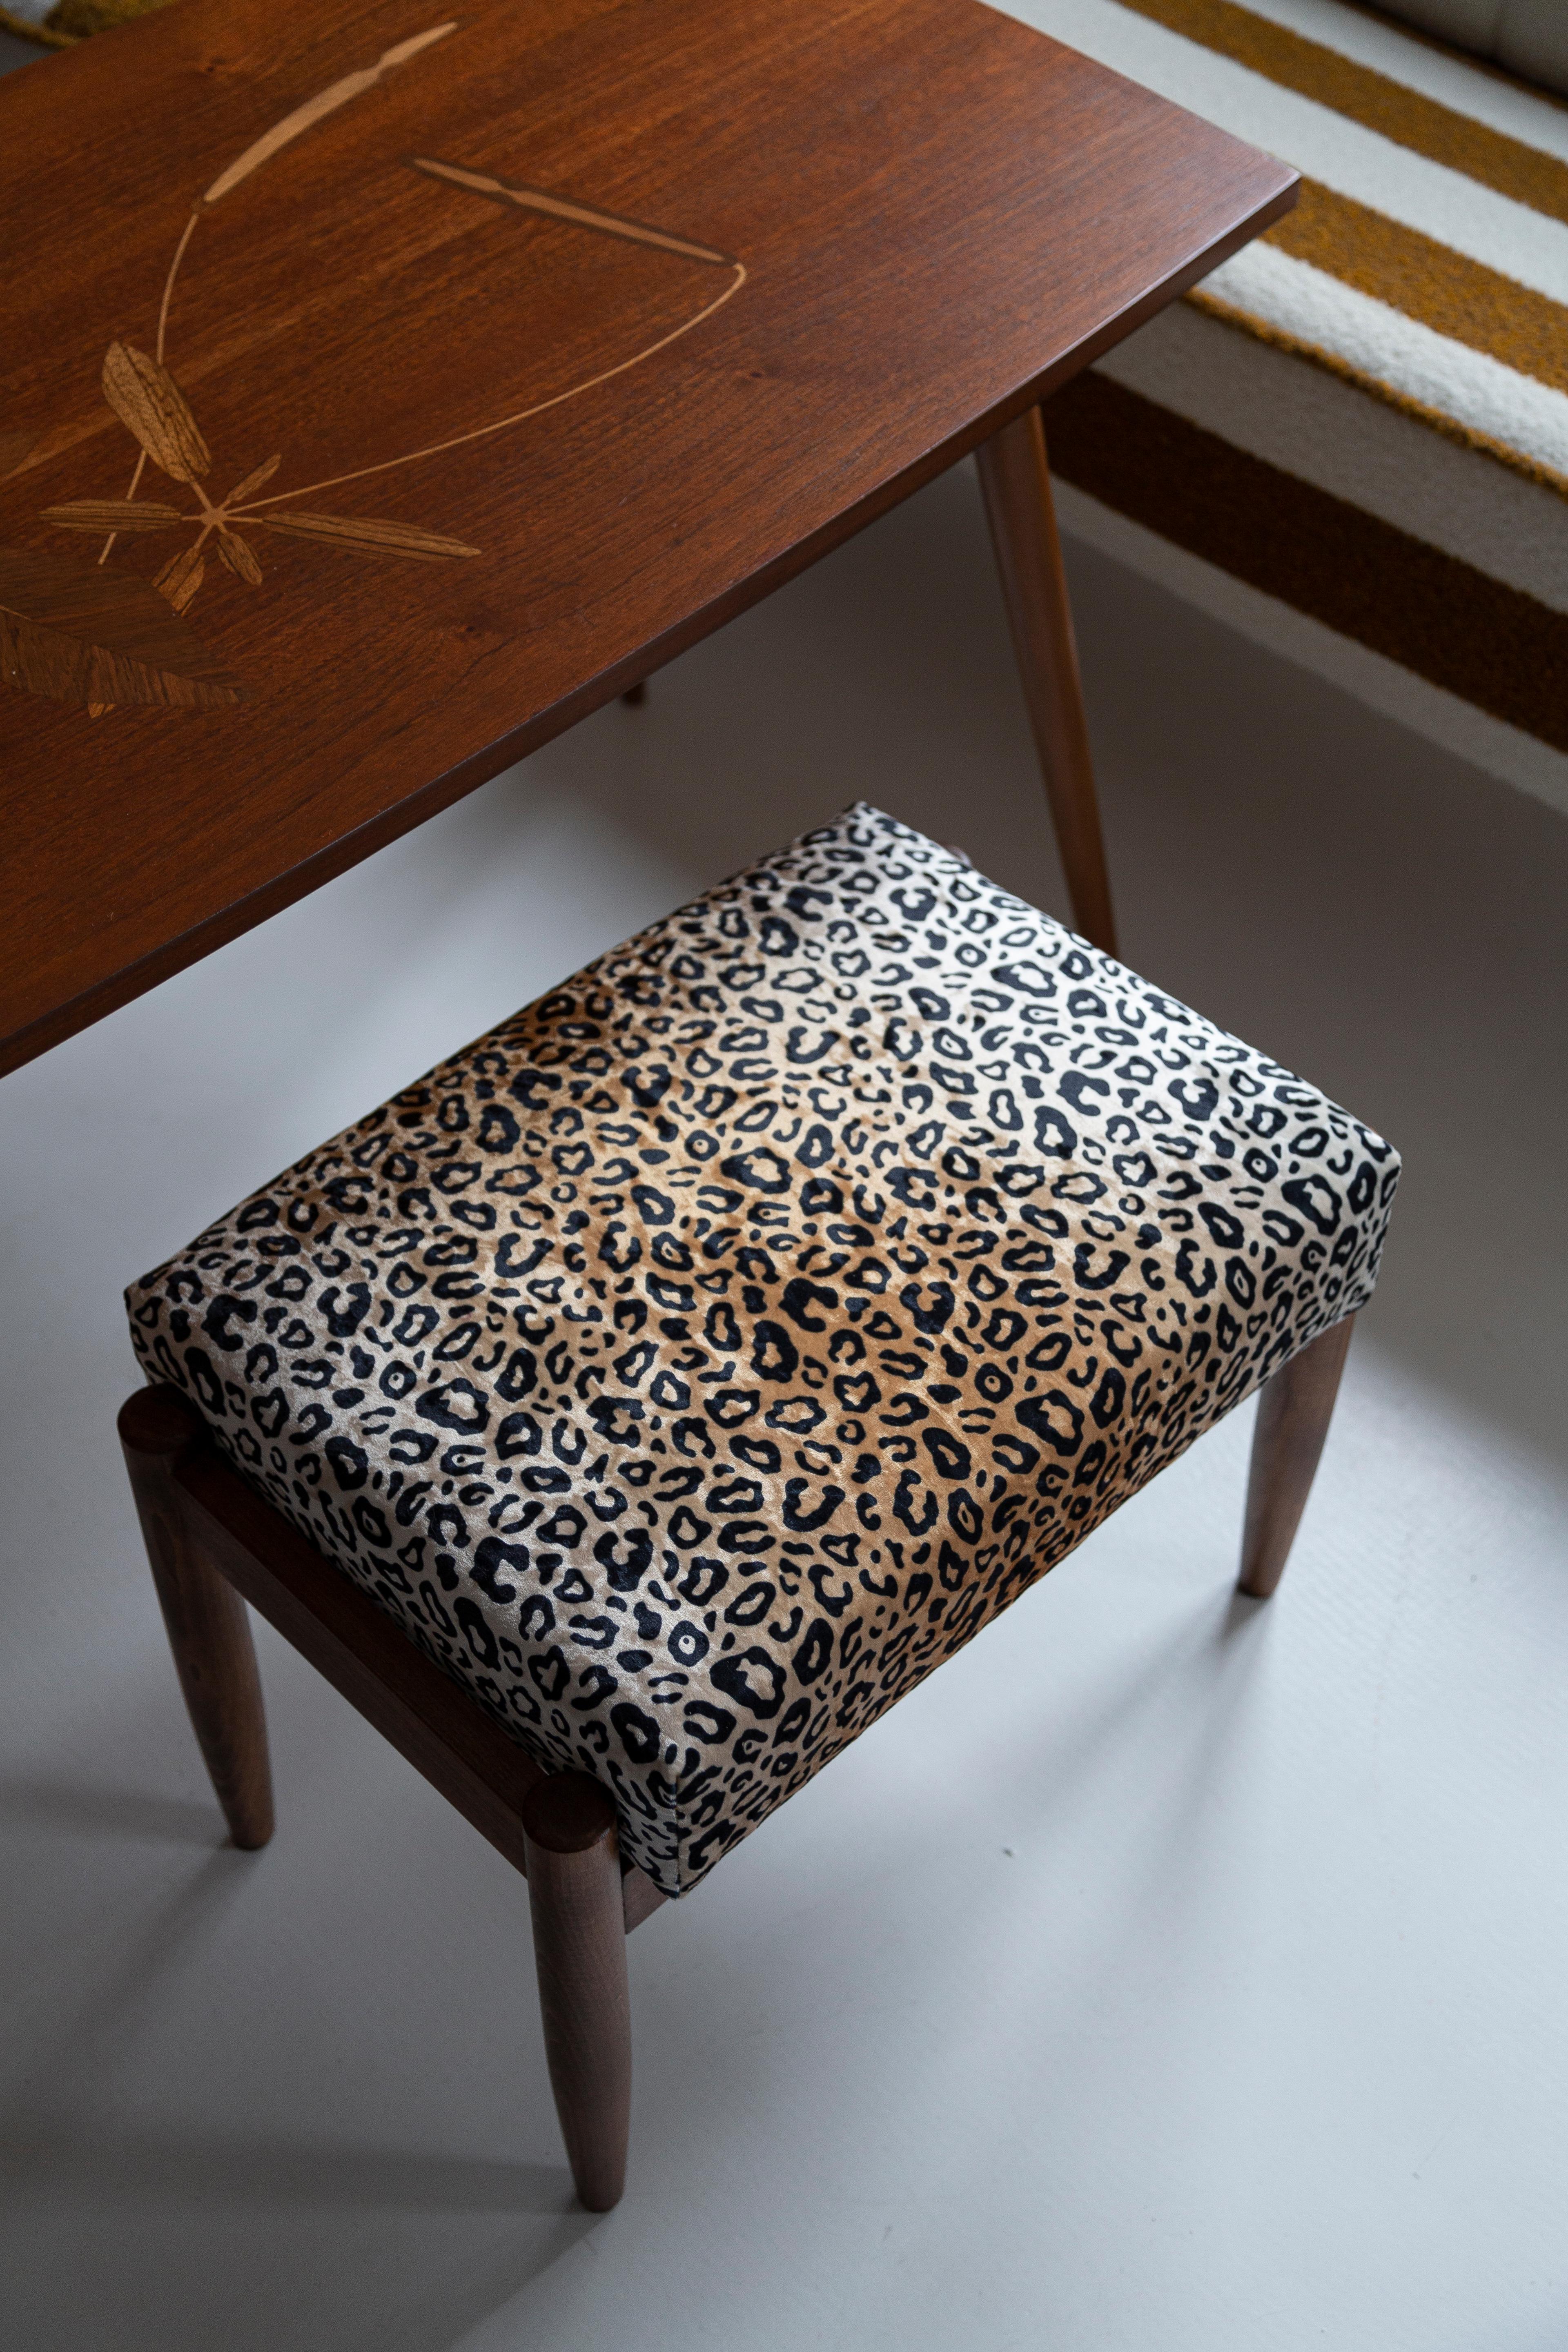 Stools from the turn of the 1960s. Beautiful leopard velvet high quality upholstery. The stools consists of an upholstered part, a seat and wooden legs narrowing downwards, characteristic of the 1960s style. We can prepare this stools also in